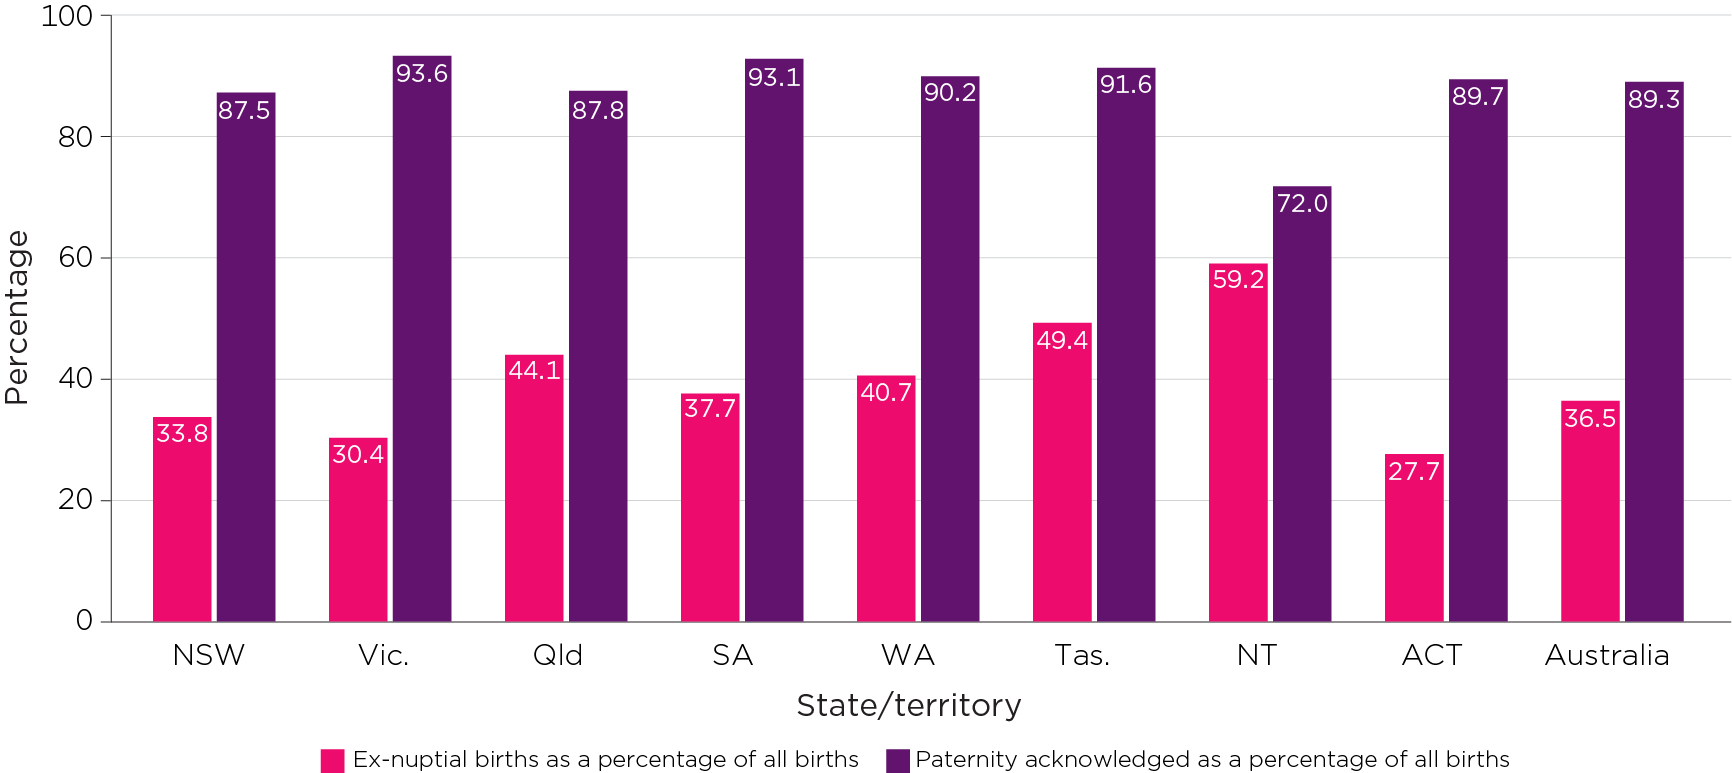 Figure 5: Ex-nuptial births by state/territory, 2020.